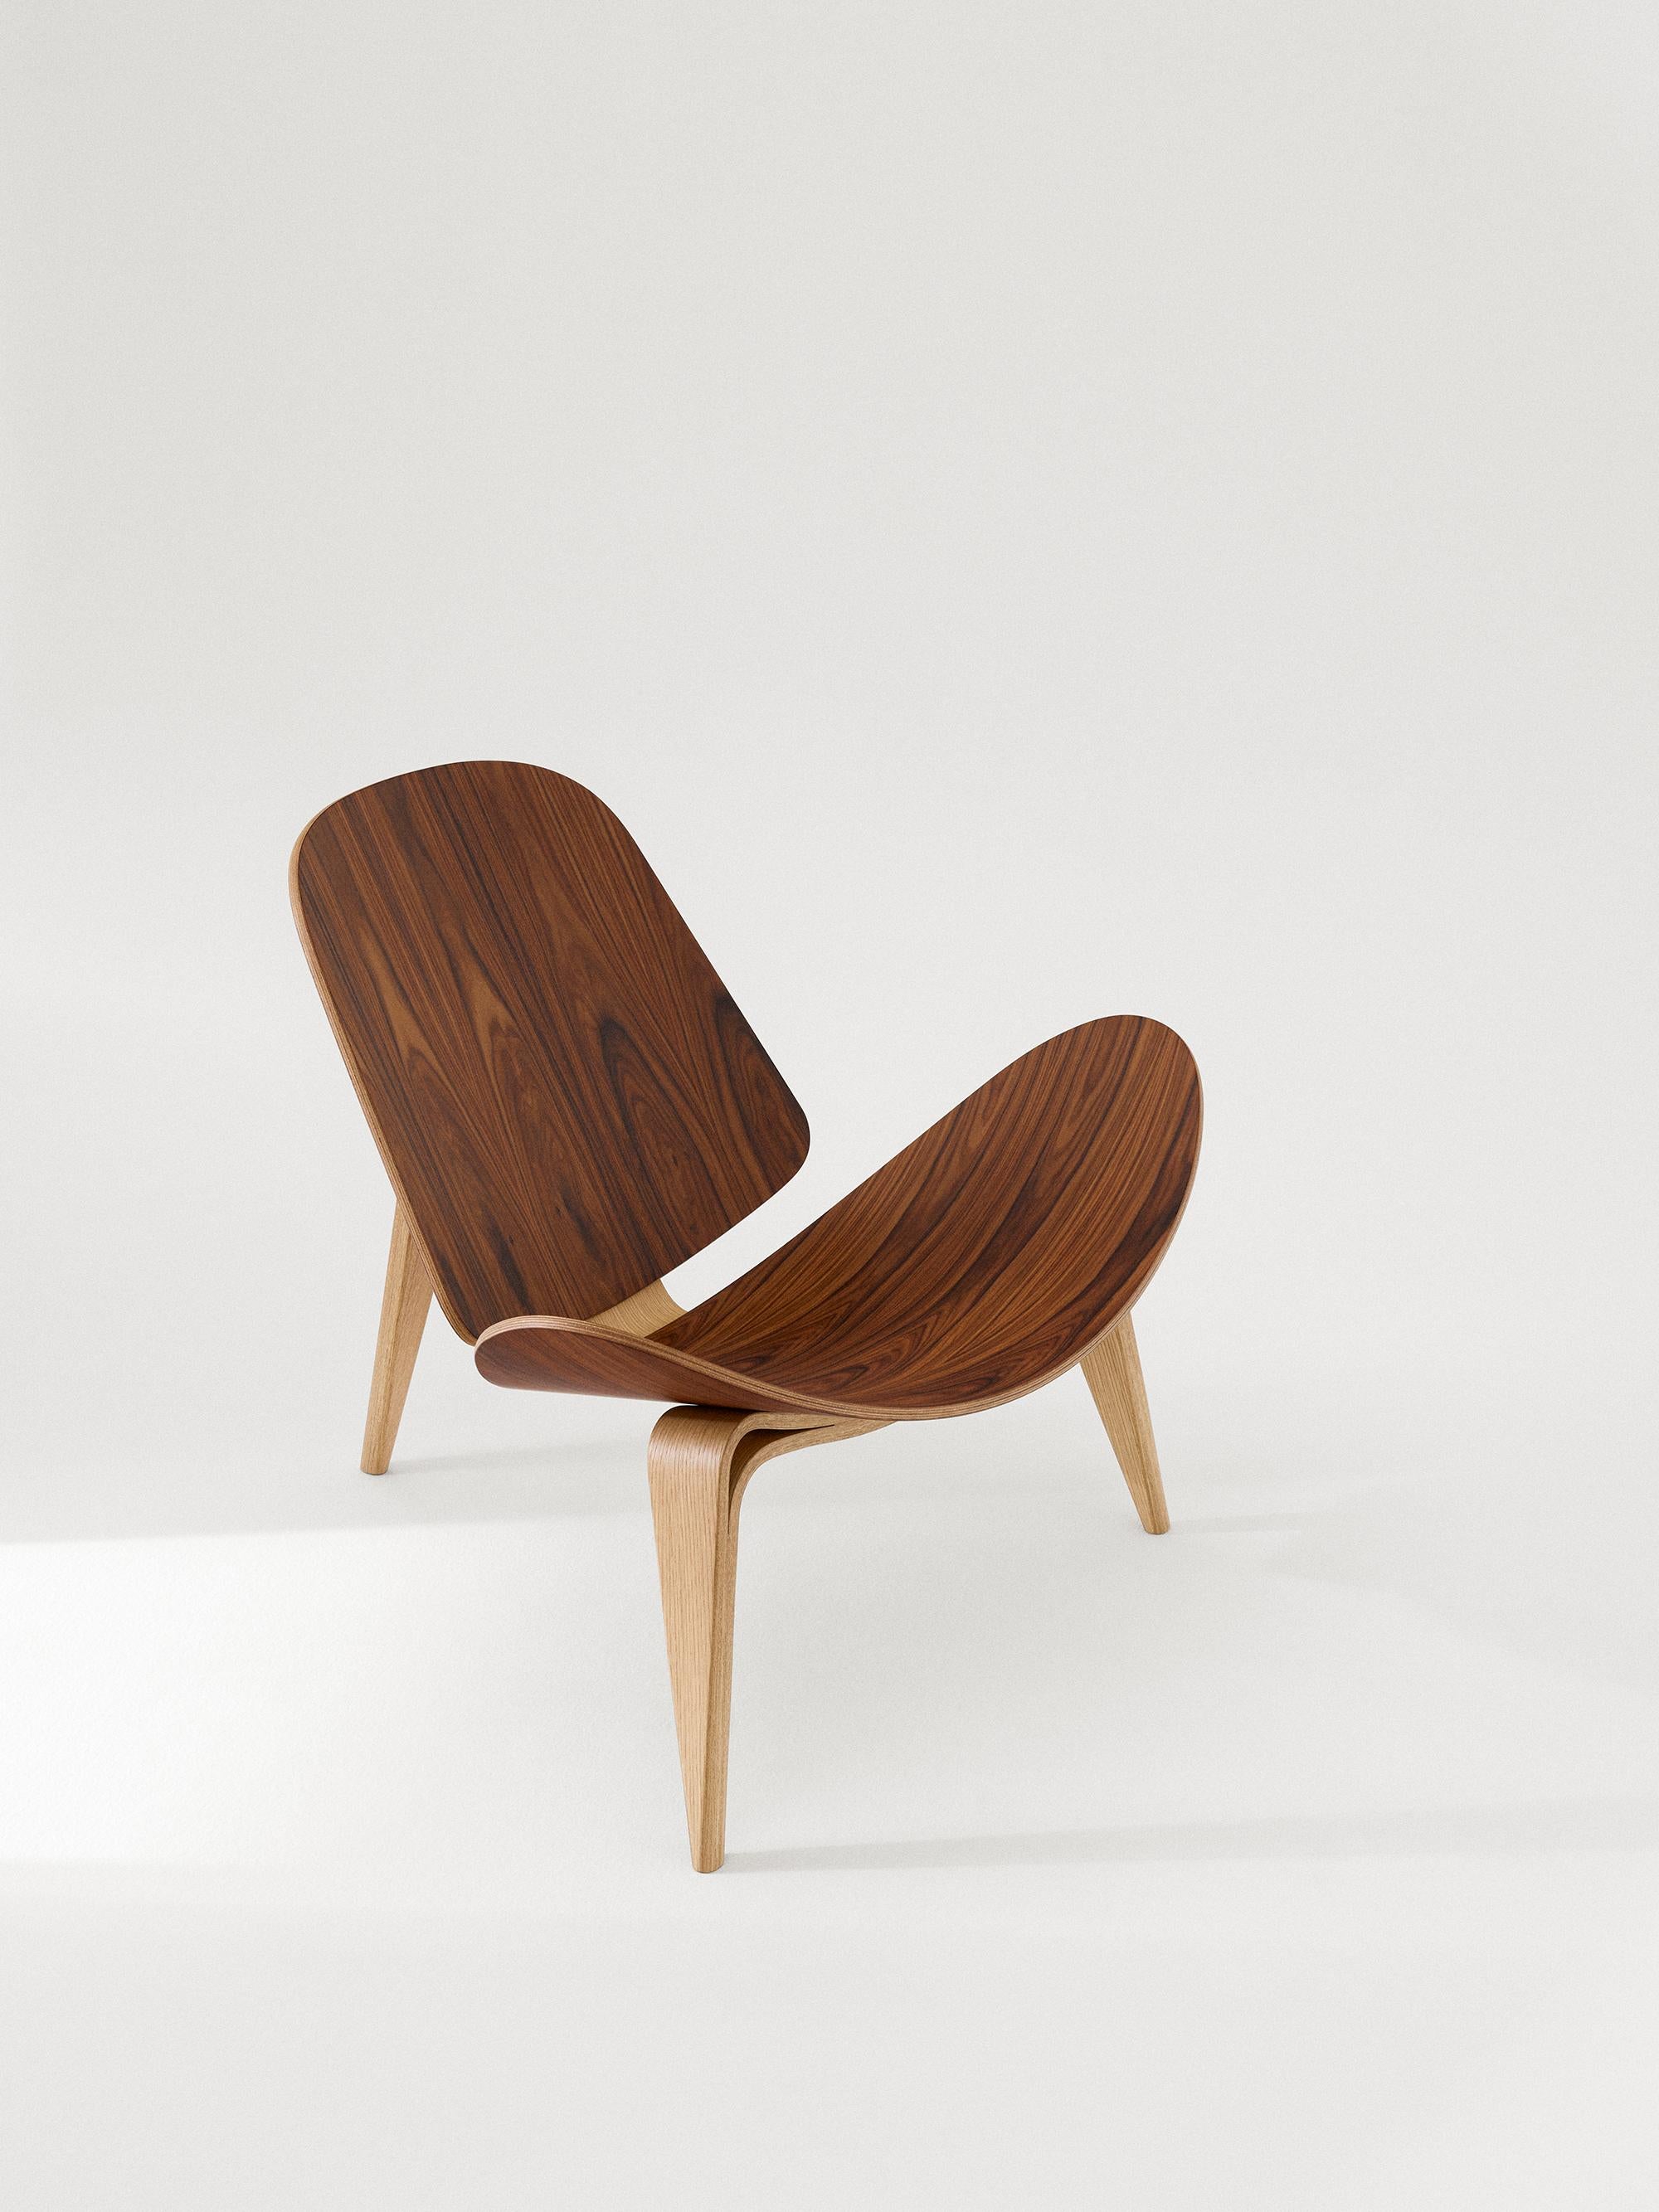 Hans J. Wegner 'CH07 Shell' 60th Anniversary Lounge Chair for Carl Hansen & Son.

The story of Danish Modern begins in 1908 when Carl Hansen opened his first workshop. His firm commitment to beauty, comfort, refinement, and craftsmanship is evident